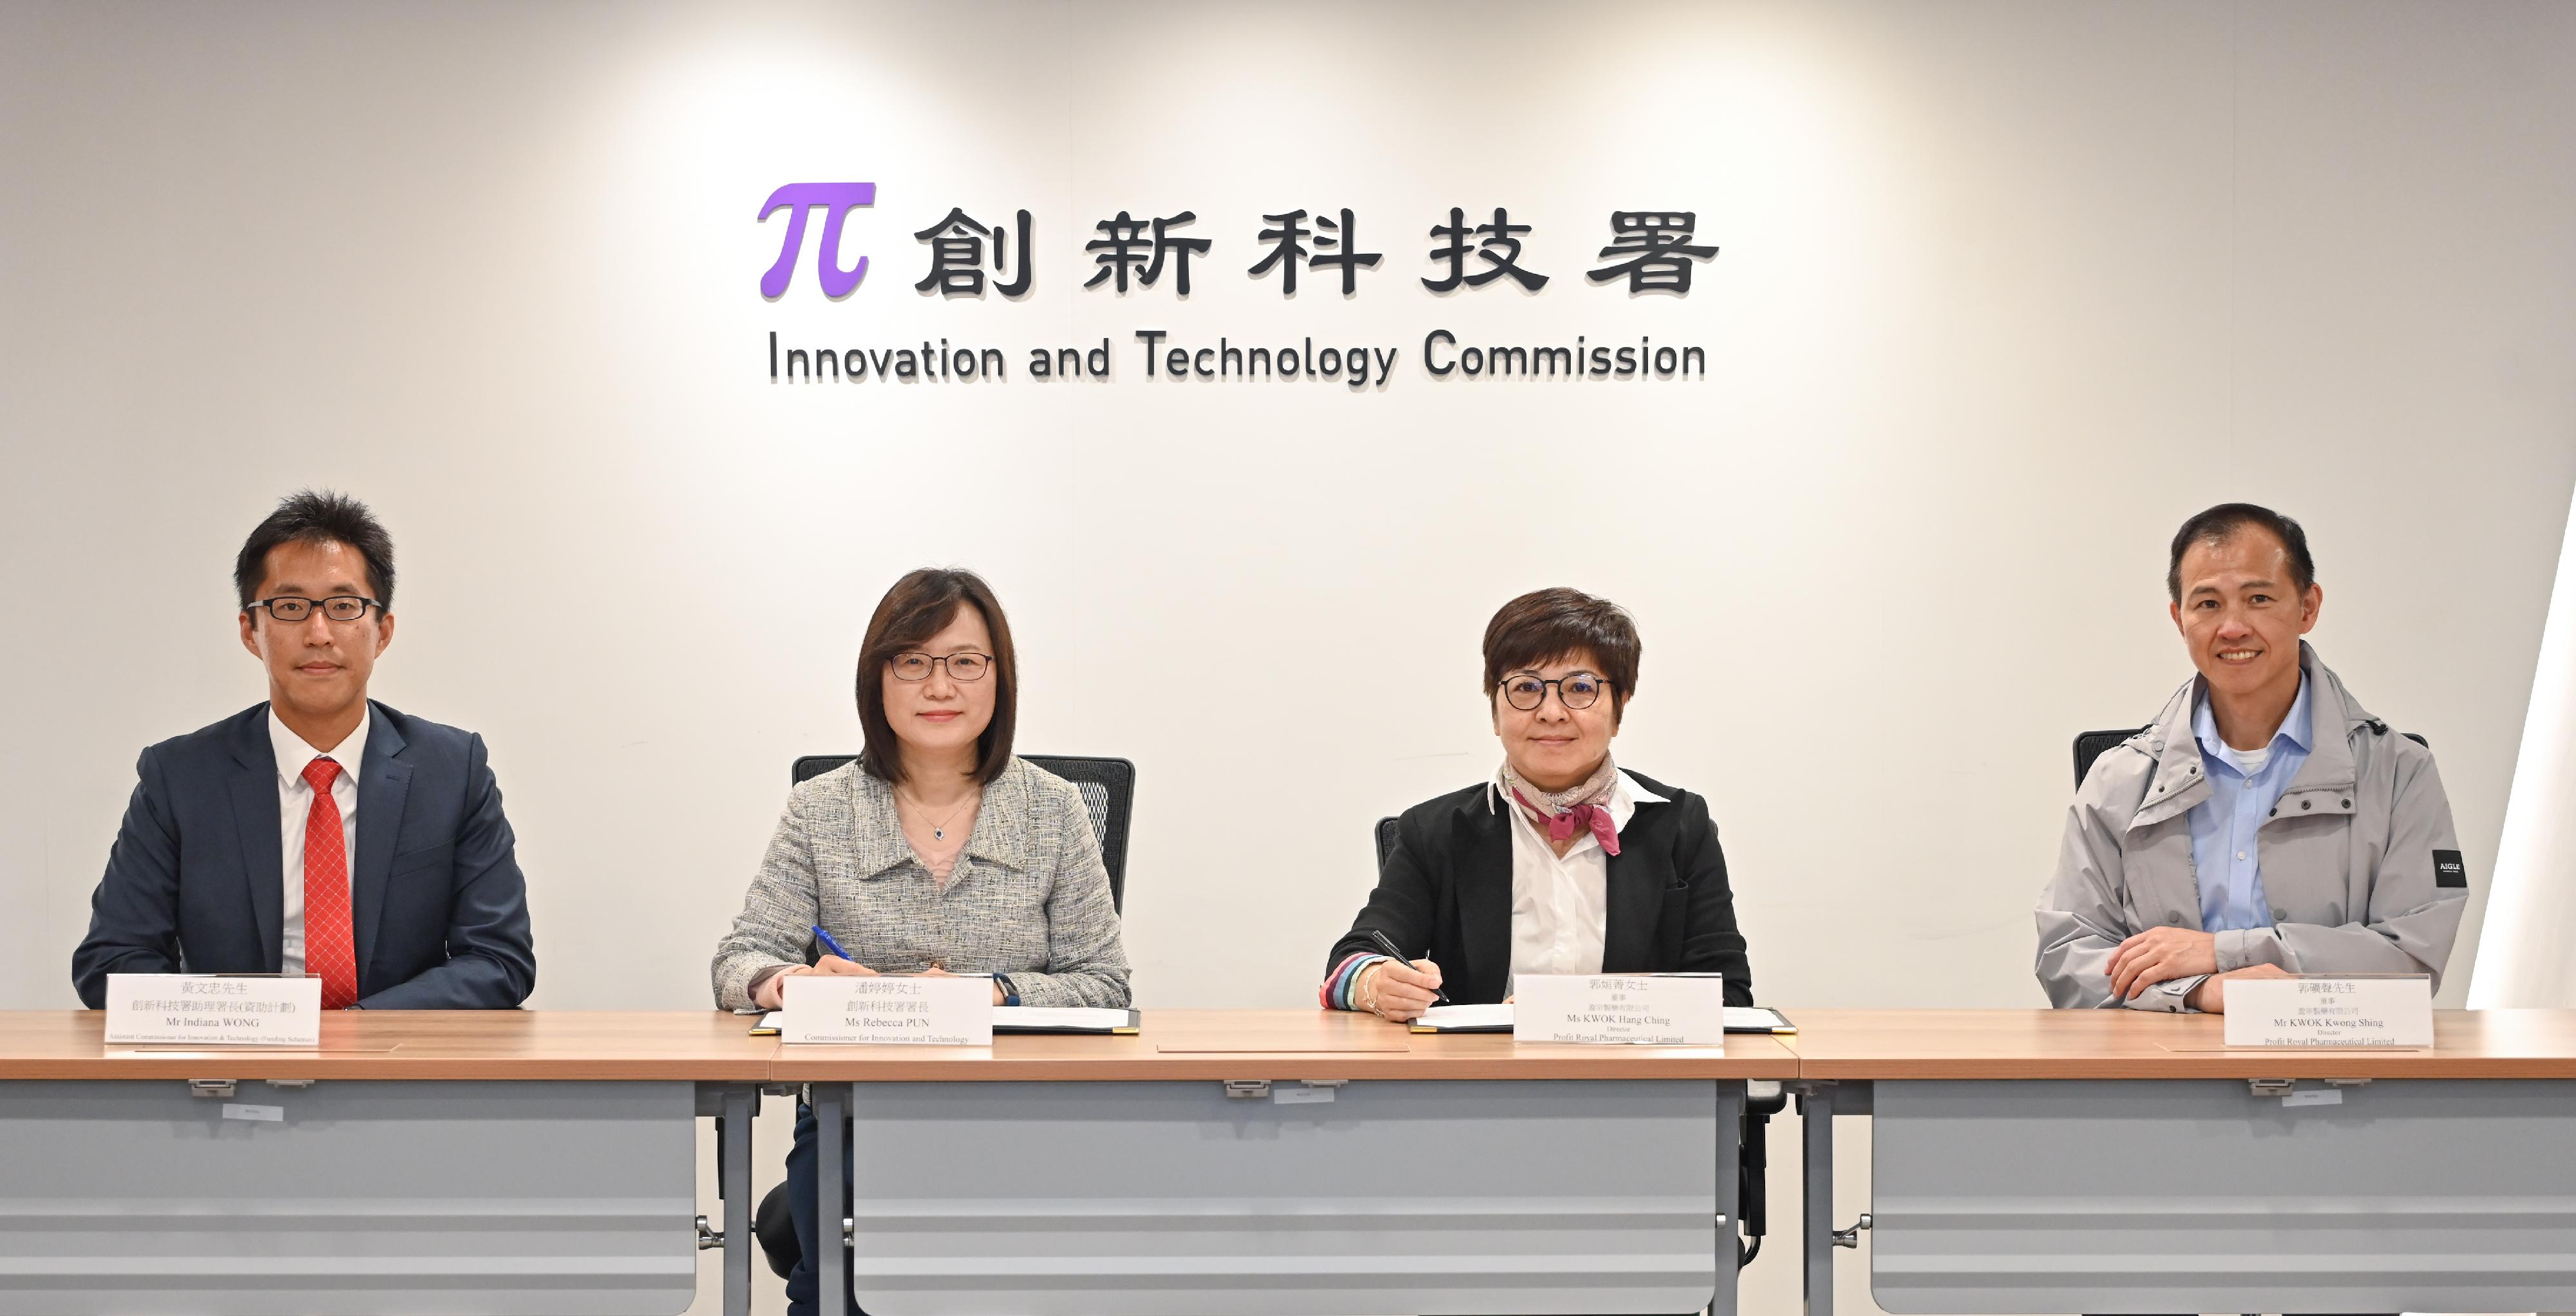 The Re-industrialisation Funding Scheme has approved funding for a project by Profit Royal Pharmaceutical Limited to set up smart production lines for nano-coated fabric and nanofibre respirator. Photo shows the Commissioner for Innovation and Technology, Ms Rebecca Pun (second left); the Assistant Commissioner for Innovation and Technology (Funding Schemes), Mr Indiana Wong (first left); the Chief Executive Officer of Profit Royal Pharmaceutical Limited, Ms Kwok Hang-ching (second right); and the Chief Financial Officer of Profit Royal Pharmaceutical Limited, Mr Kwok Kwong-shing (first right), signing the funding agreement today (March 14).